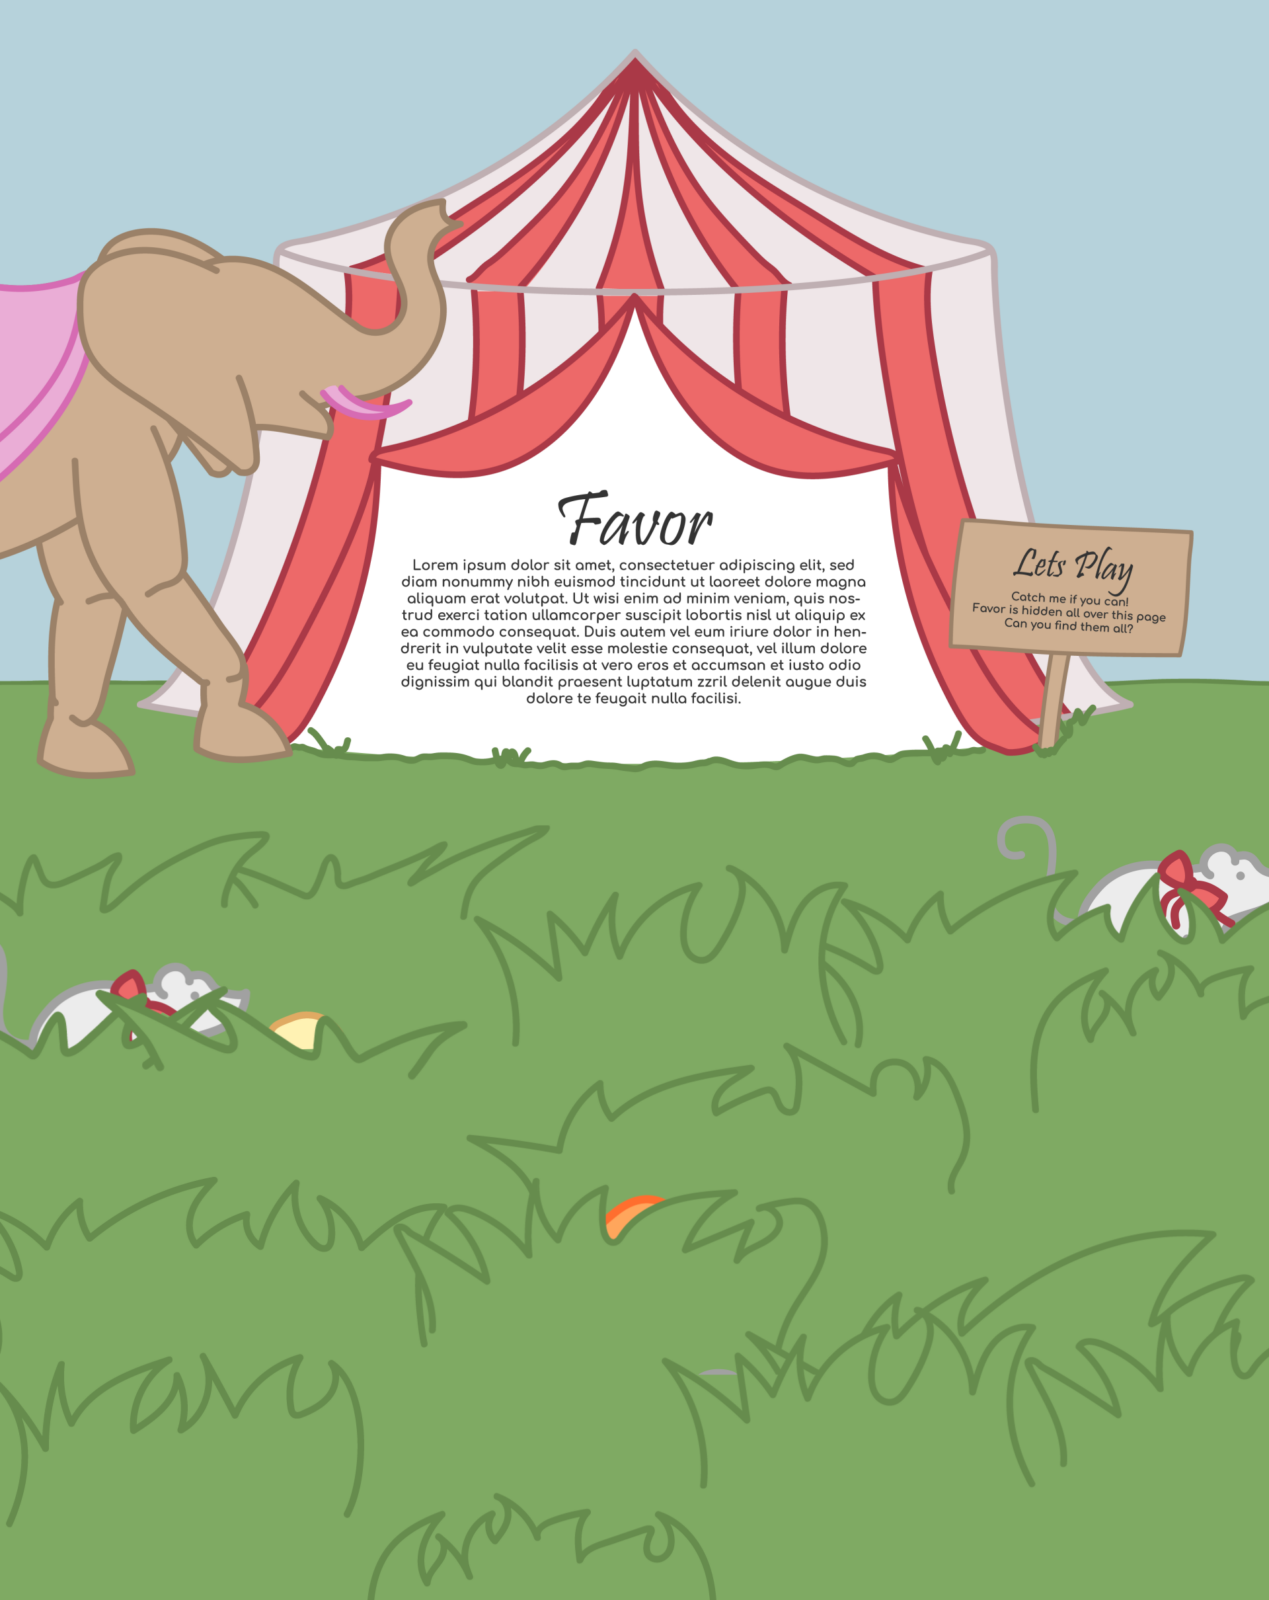 Image of the main website design, an elephant next to a tent with various tiers of grass in front of it with various pictures hidden amongst the grass.